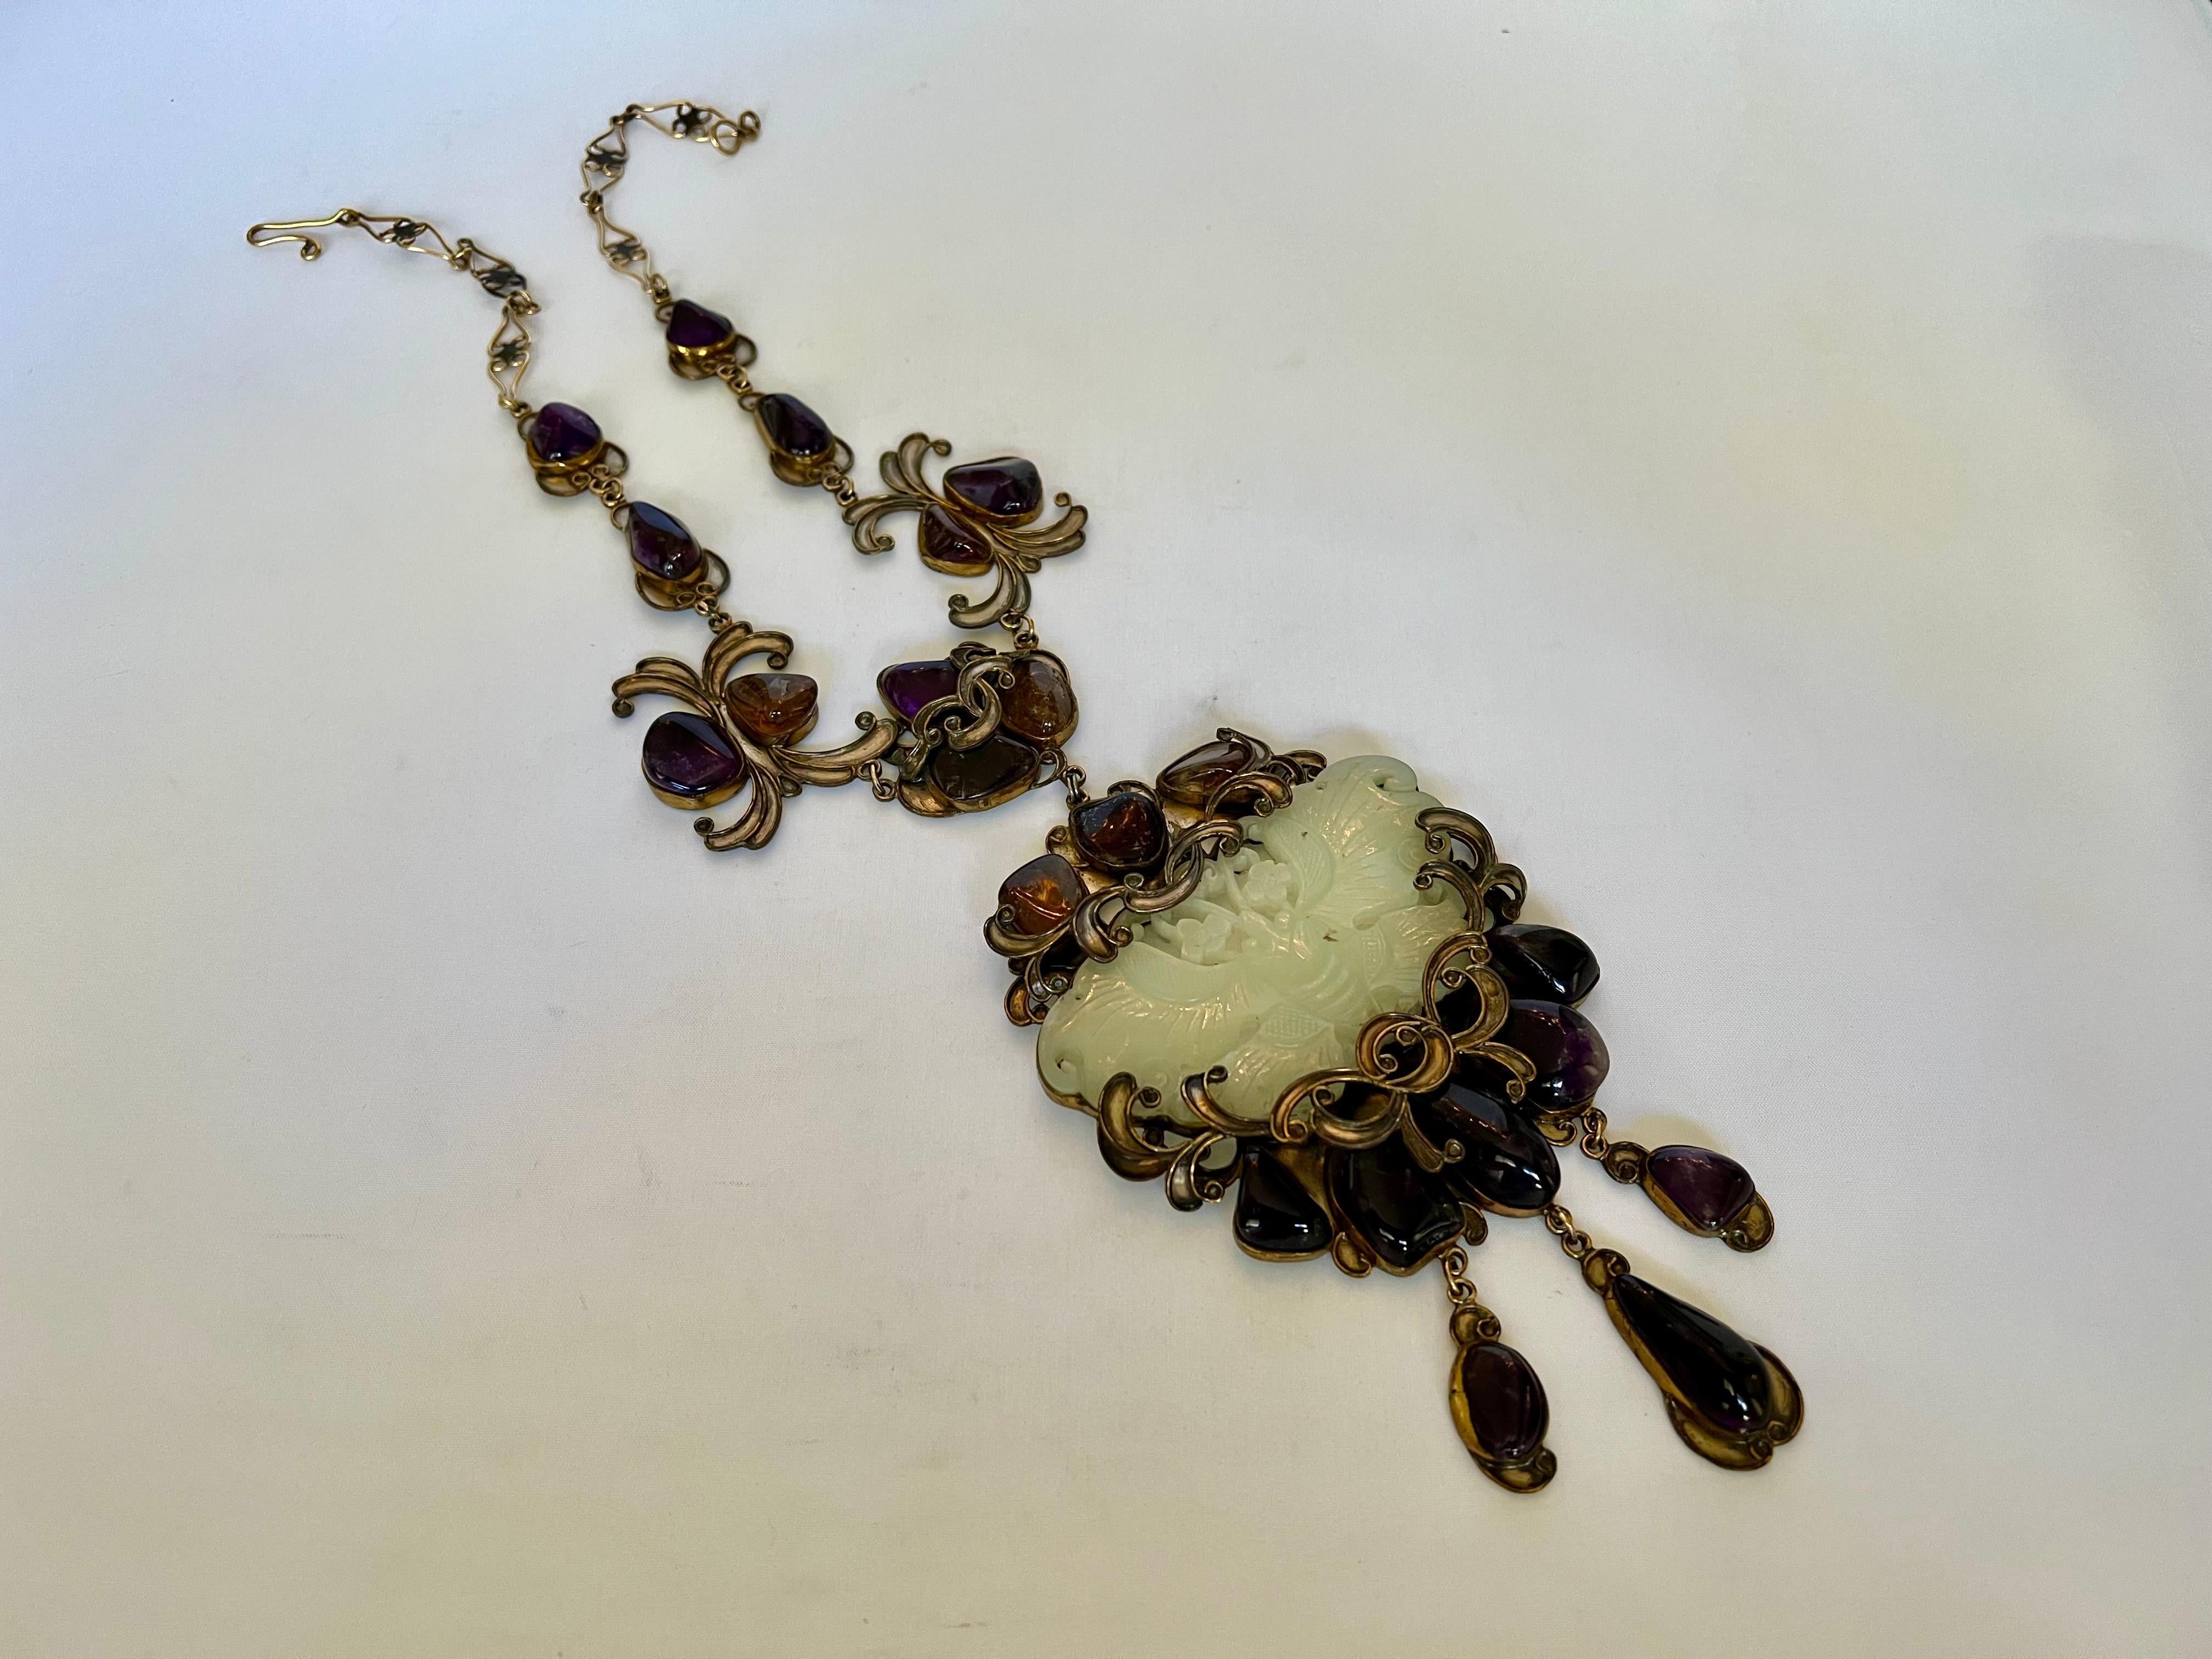 Very rare vintage large silver pendant necklace by Vega Maddux in an Art Noveau  style- the necklace is comprised out of silver and features a large carved nephrite butterfly which is surrounded by large amethyst cabochons. Highly collectible.